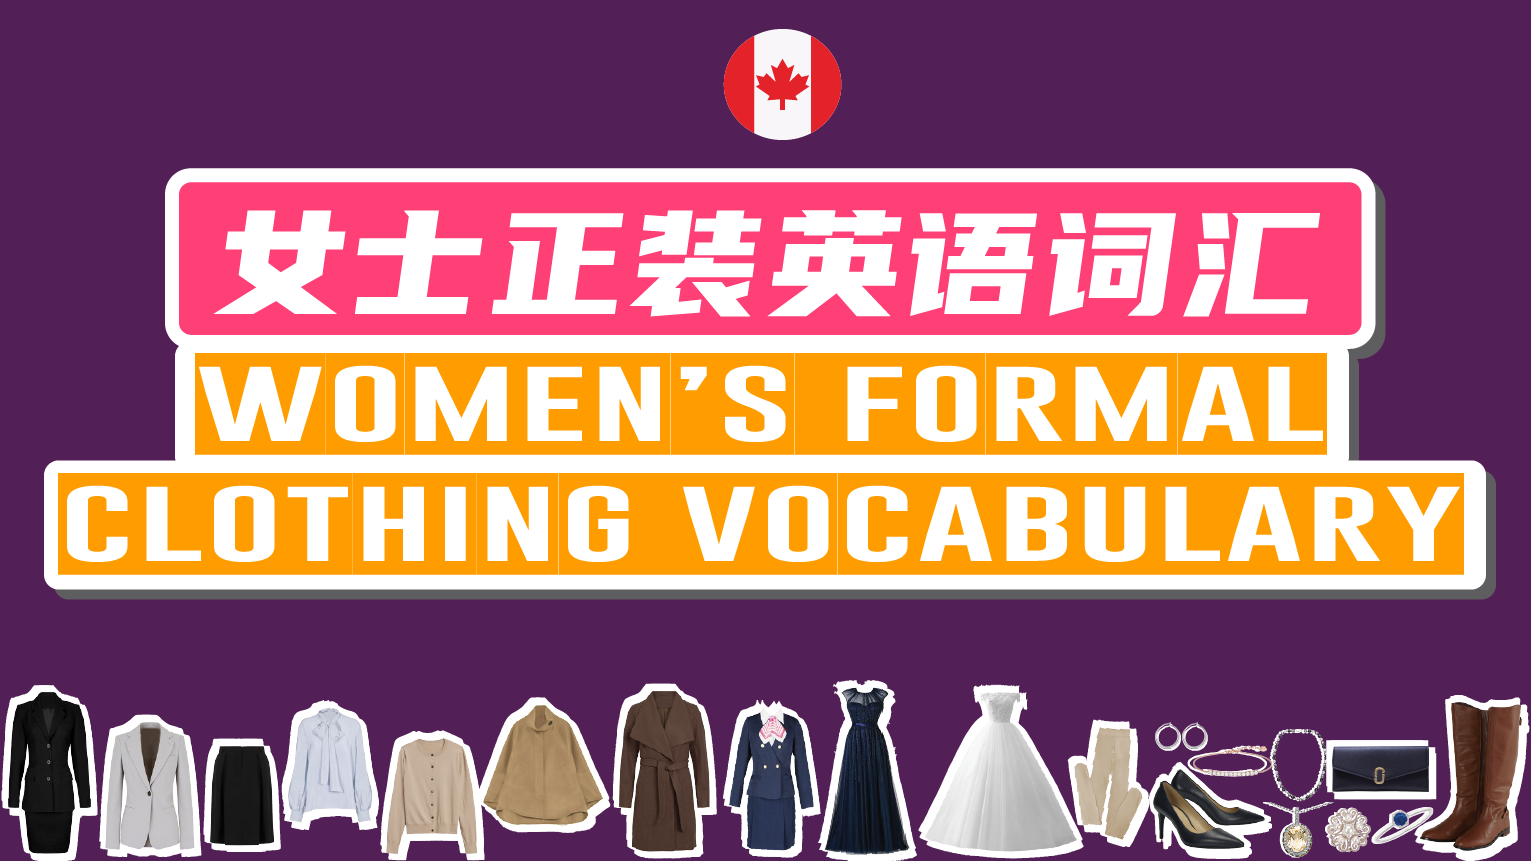 Women's Formal Clothing Vocabulary